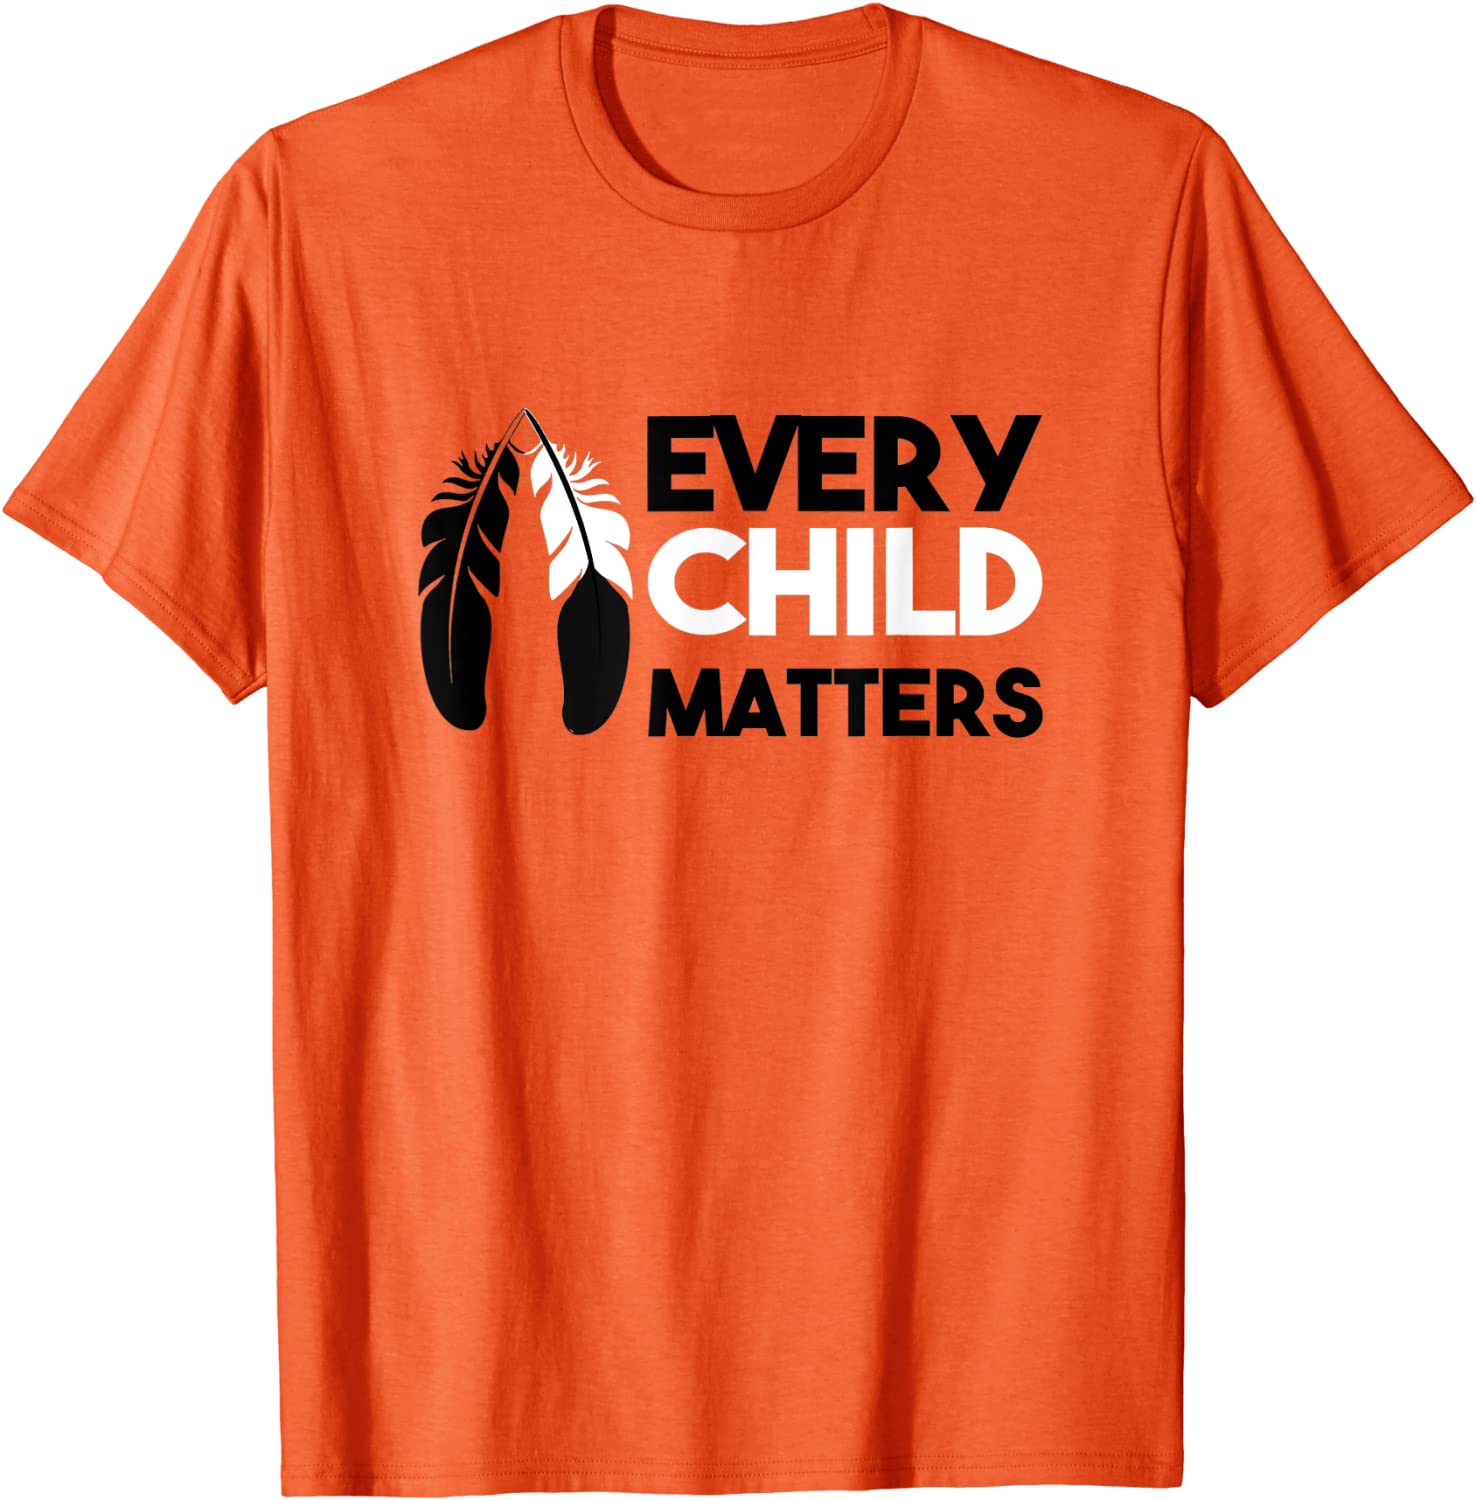 Every Child Matters Orange Day Residential Schools Classic Tee Shirt ...